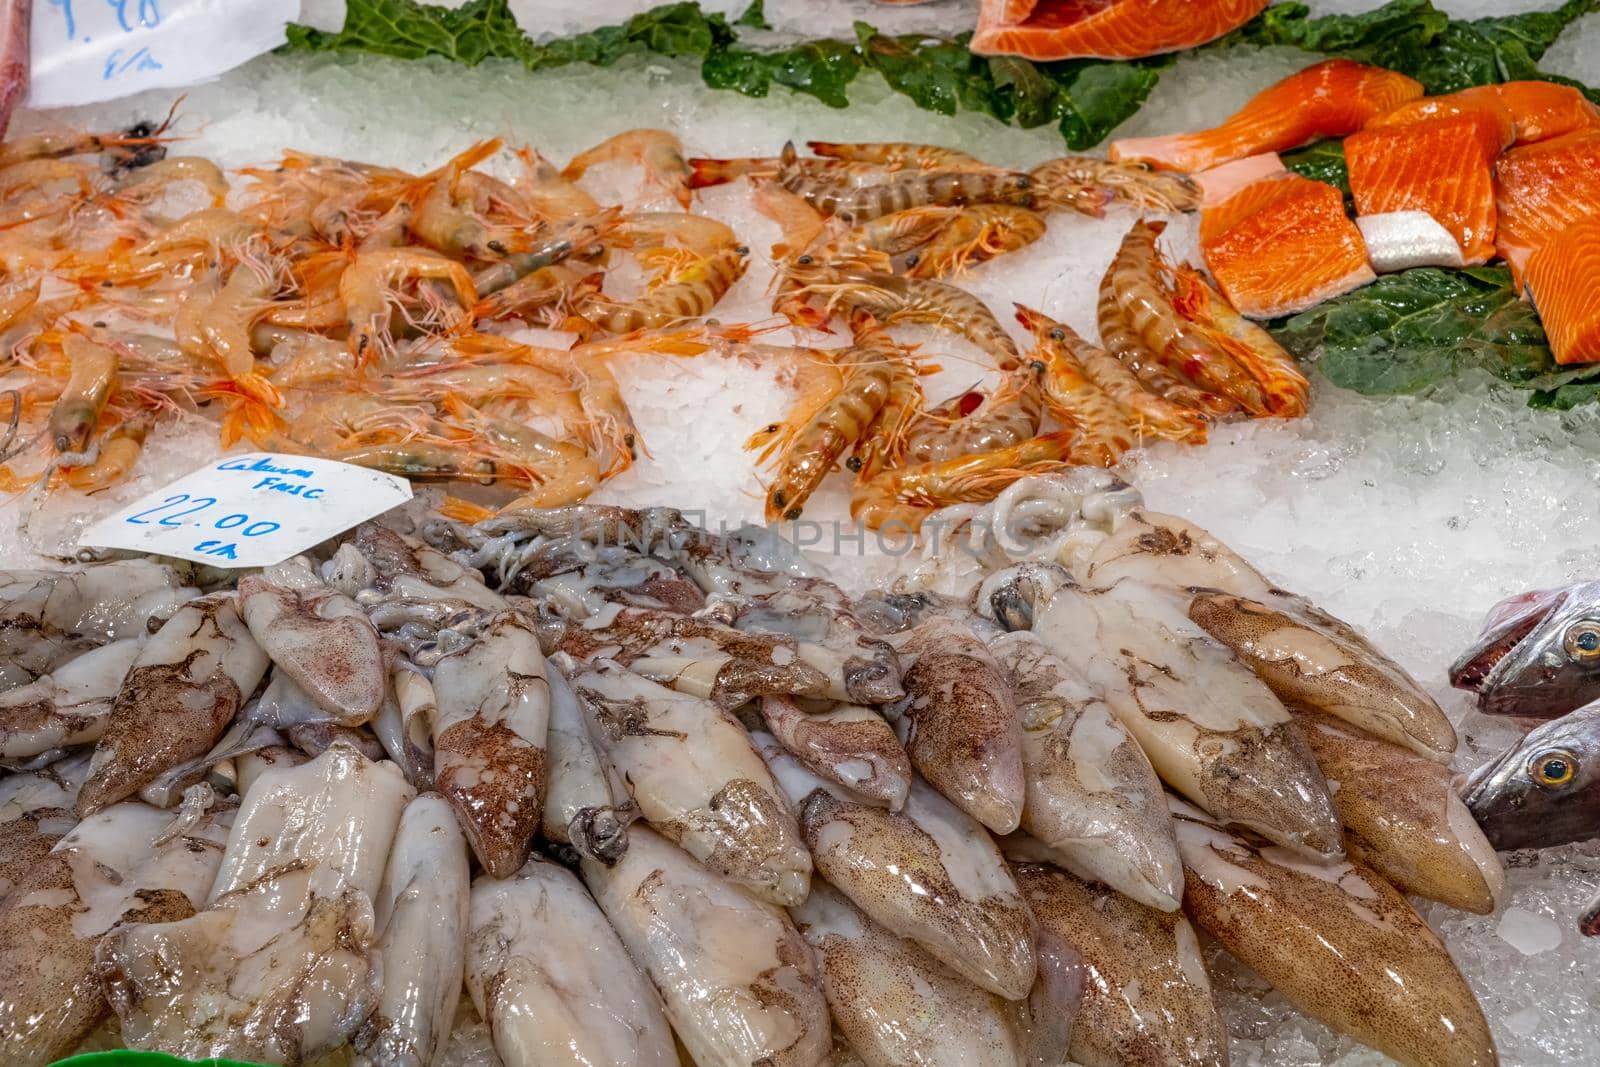 Squid, shrimps and salmon for sale at a market in Barcelona